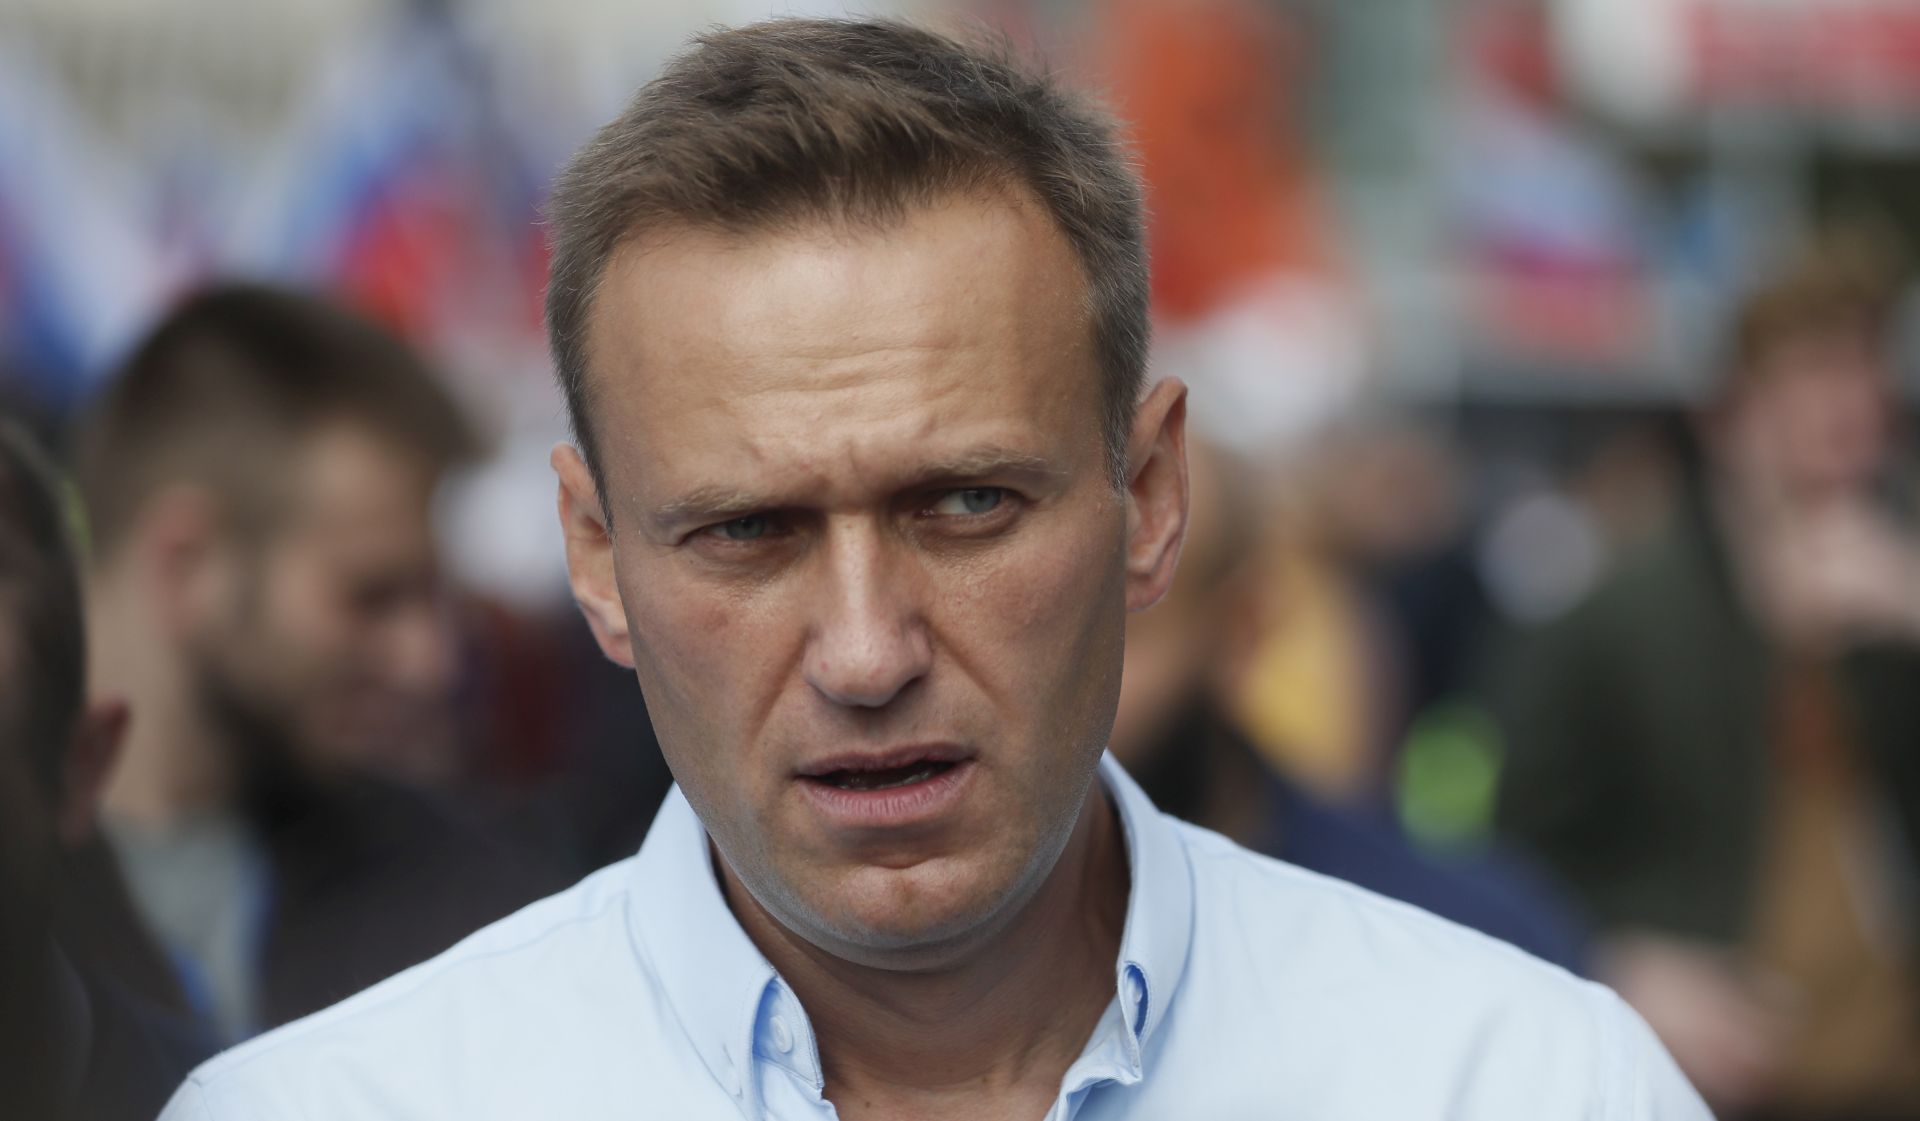 epa08616676 (FILE) - Russian Opposition activist Alexei Navalny attends a rally in support of opposition candidates in the Moscow City Duma elections in downtown of Moscow, Russia, 20 July 2019 (reissued 21 August 2020).  A German human rights group was to bring Russian opposition leader Alexei Navalny from Omsk, Russia, to a German hospital for treatment after a suspected poisoning left him comatose.  EPA/SERGEI ILNITSKY *** Local Caption *** 55367308